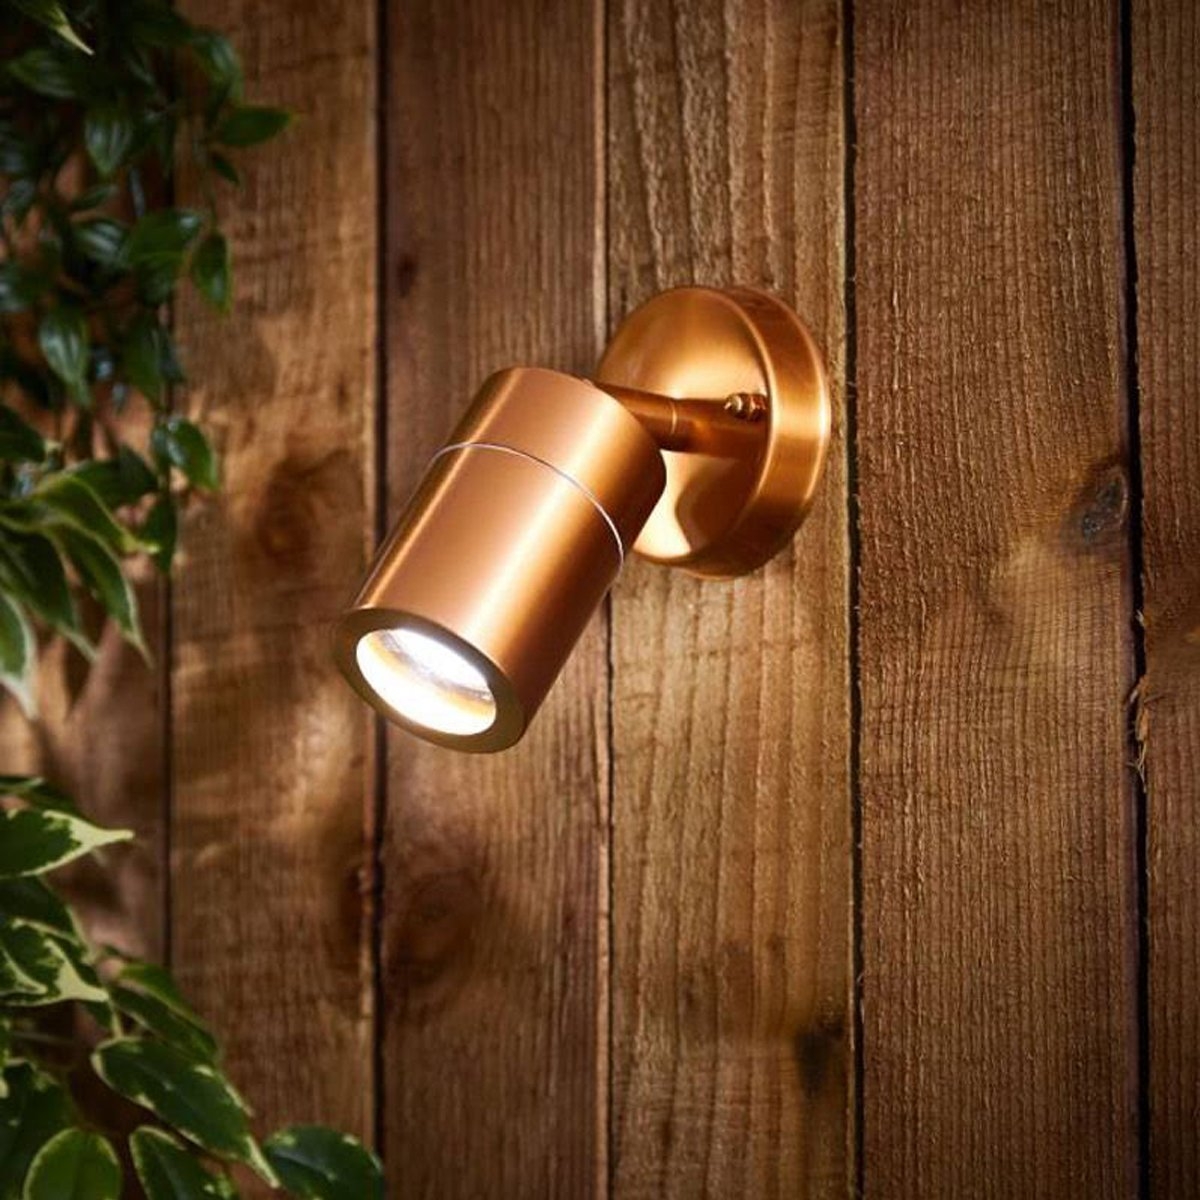 Stainless Steel Adjustable Outdoor Wall Spotlight – Choice Of Colours Copper – Wall Light – CGC Retail Outlet